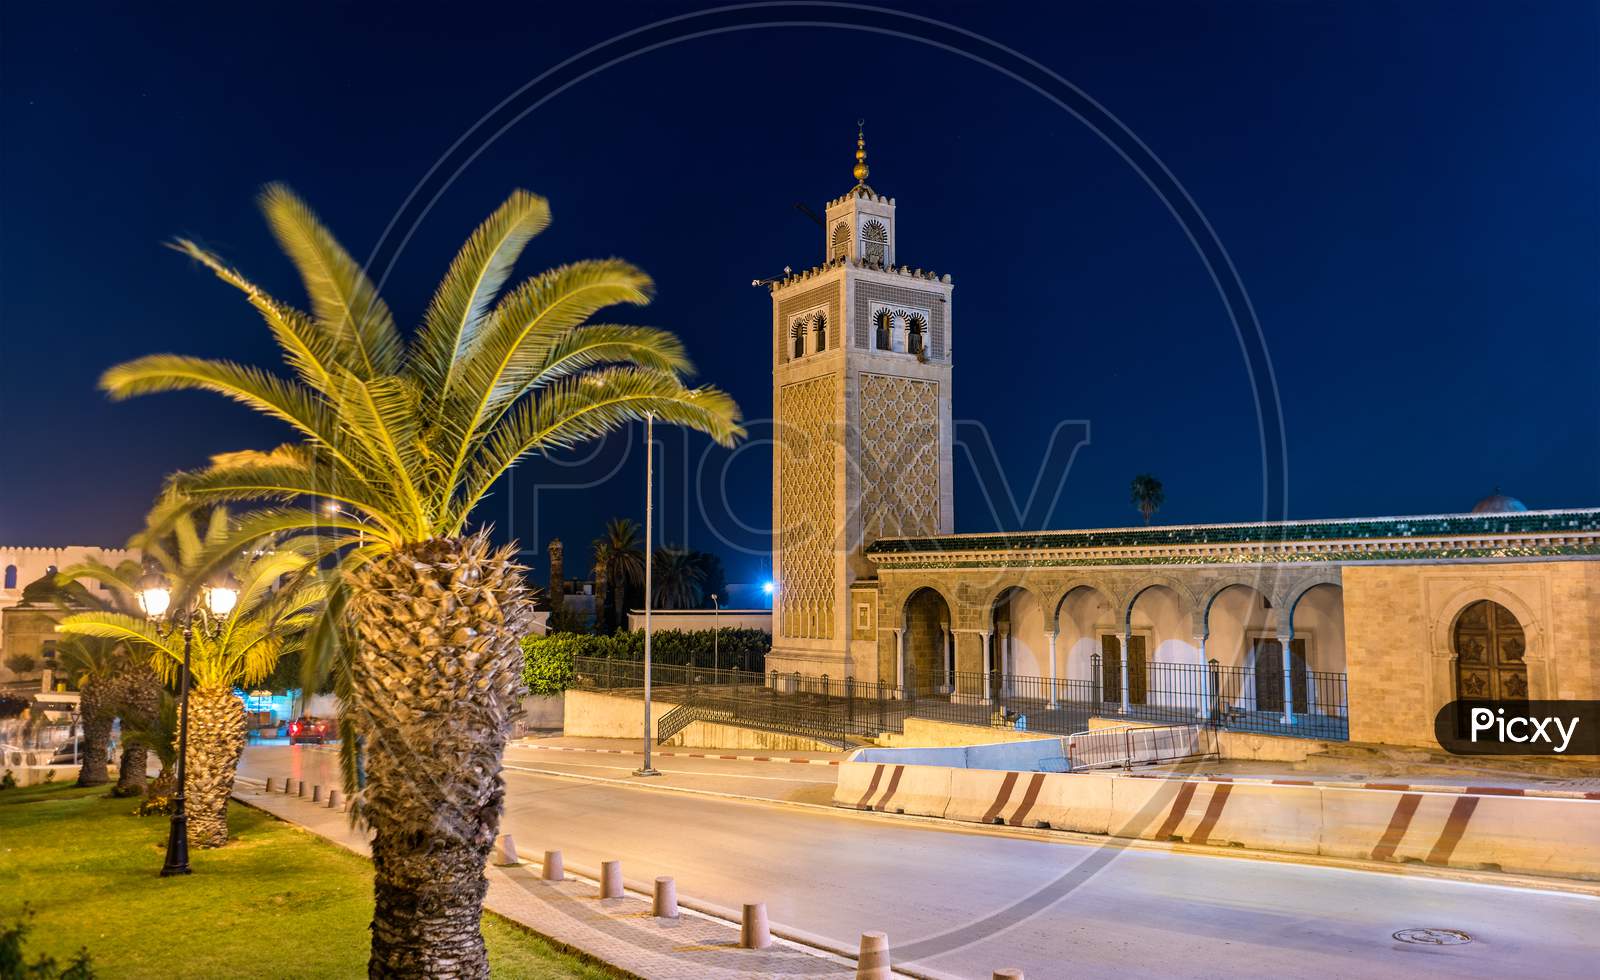 Kasbah Mosque, A Historic Monument In Tunis. Tunisia, North Africa